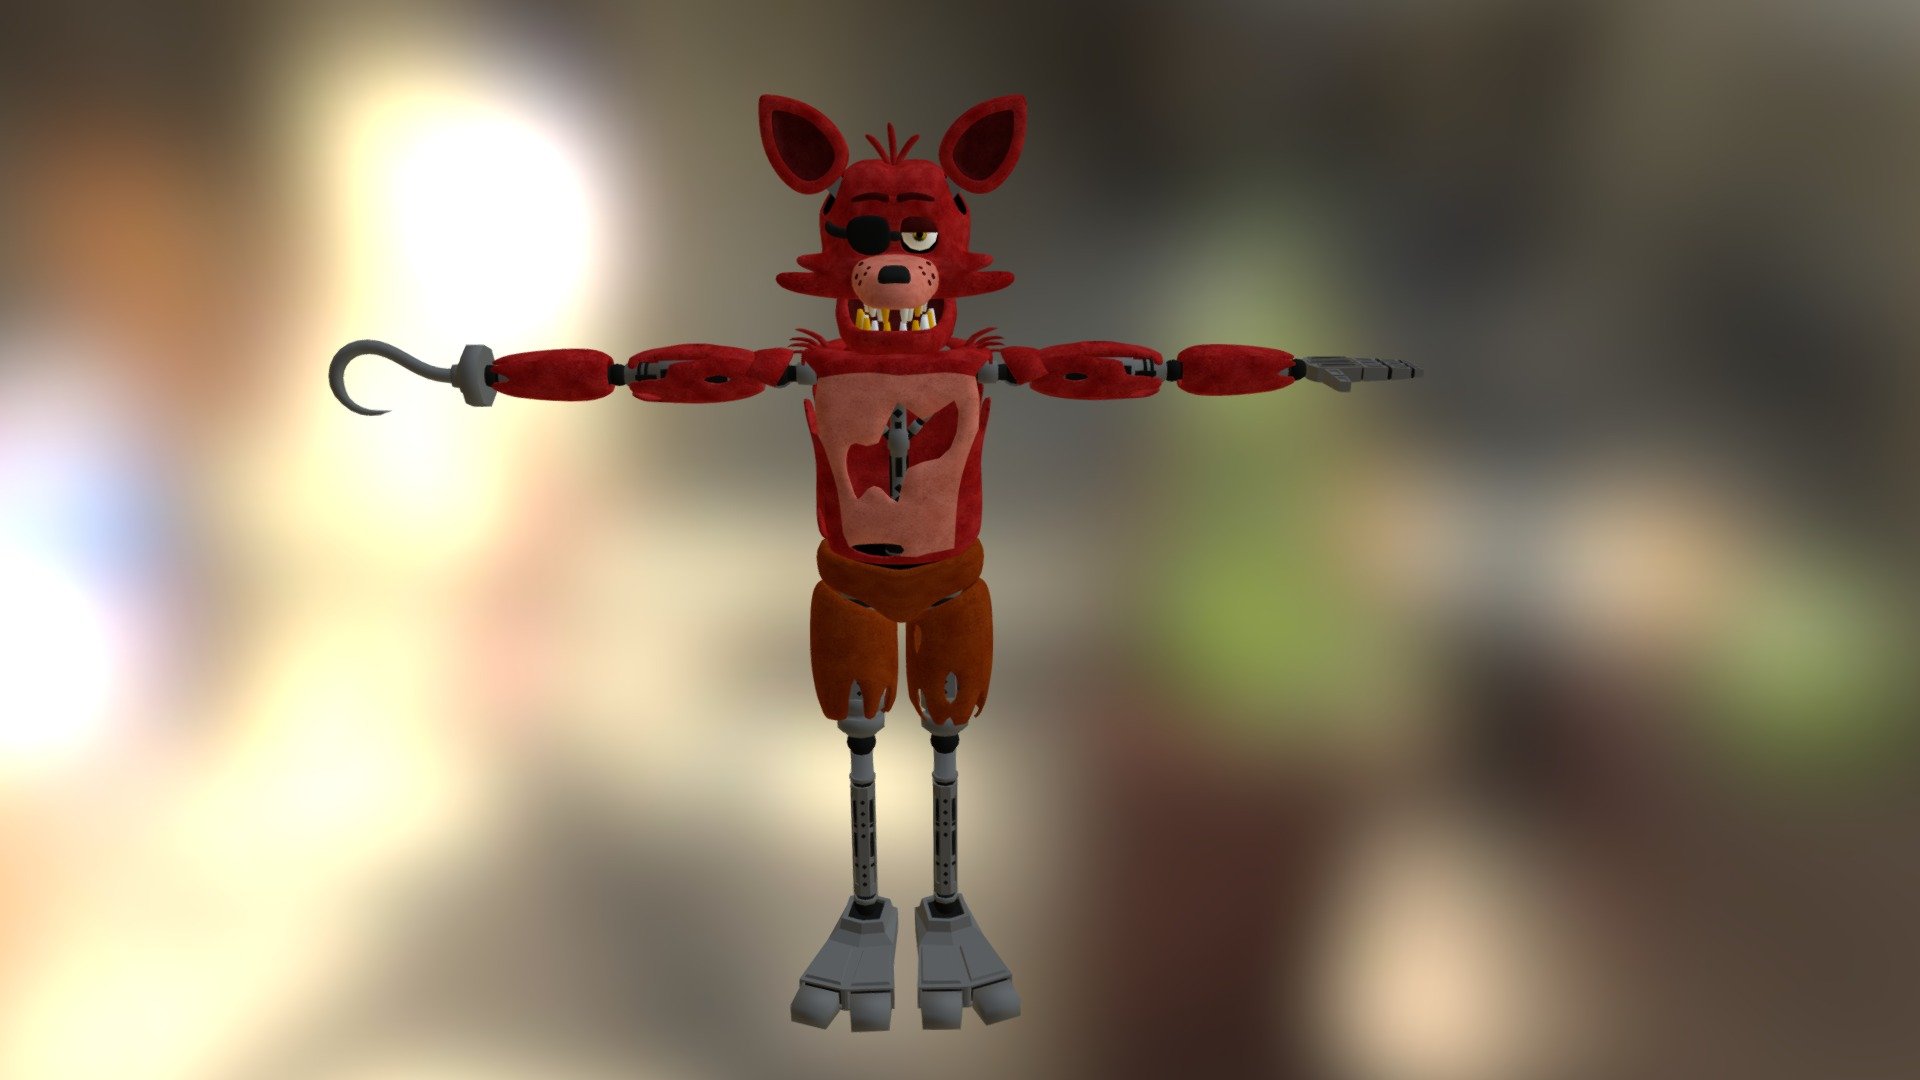 foxy-download-free-3d-model-by-999angry-b015ce6-sketchfab